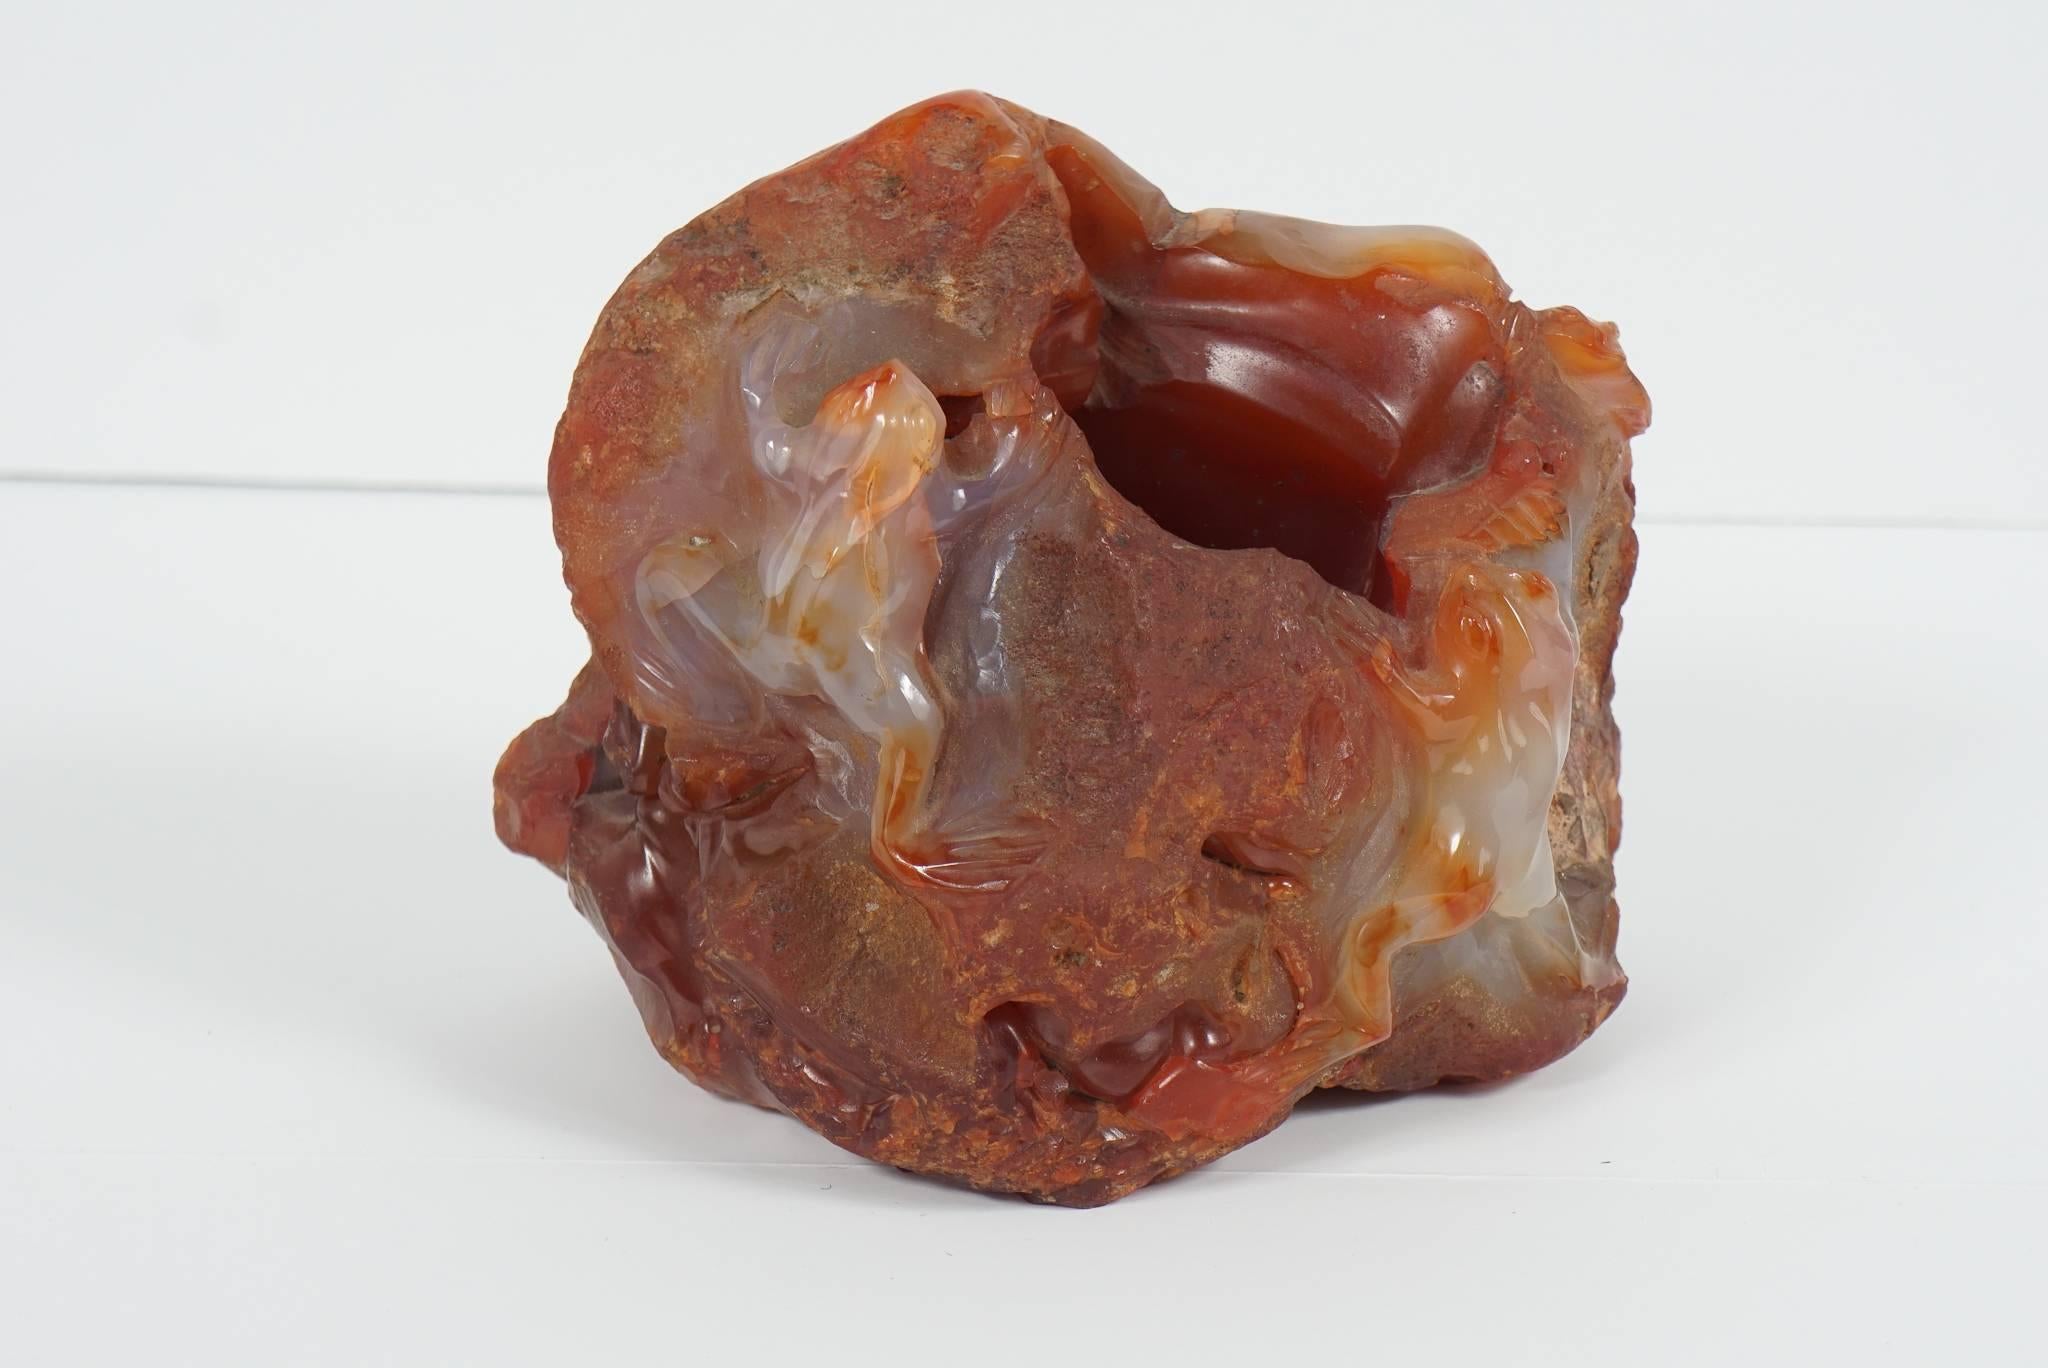 This very interesting scholars object is a naturally shaped bolder of agate with its natural and unpolished surface remaining then enhanced with carving bringing out frogs climbing over the bolder. A well has been done into the bolder making it a